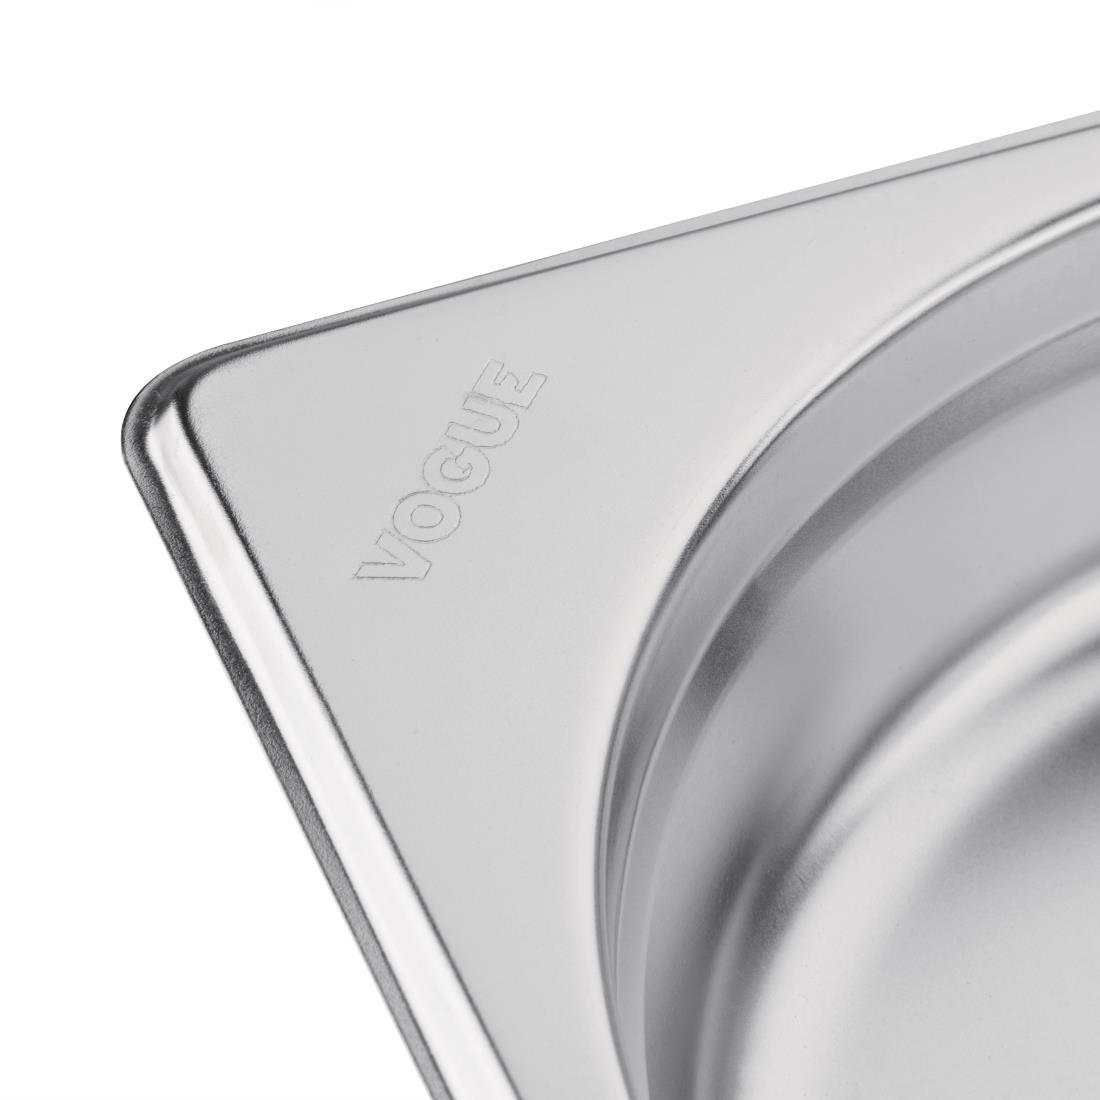 Vogue Stainless Steel 1/4 Gastronorm Pan 40mm - GM313  - 6